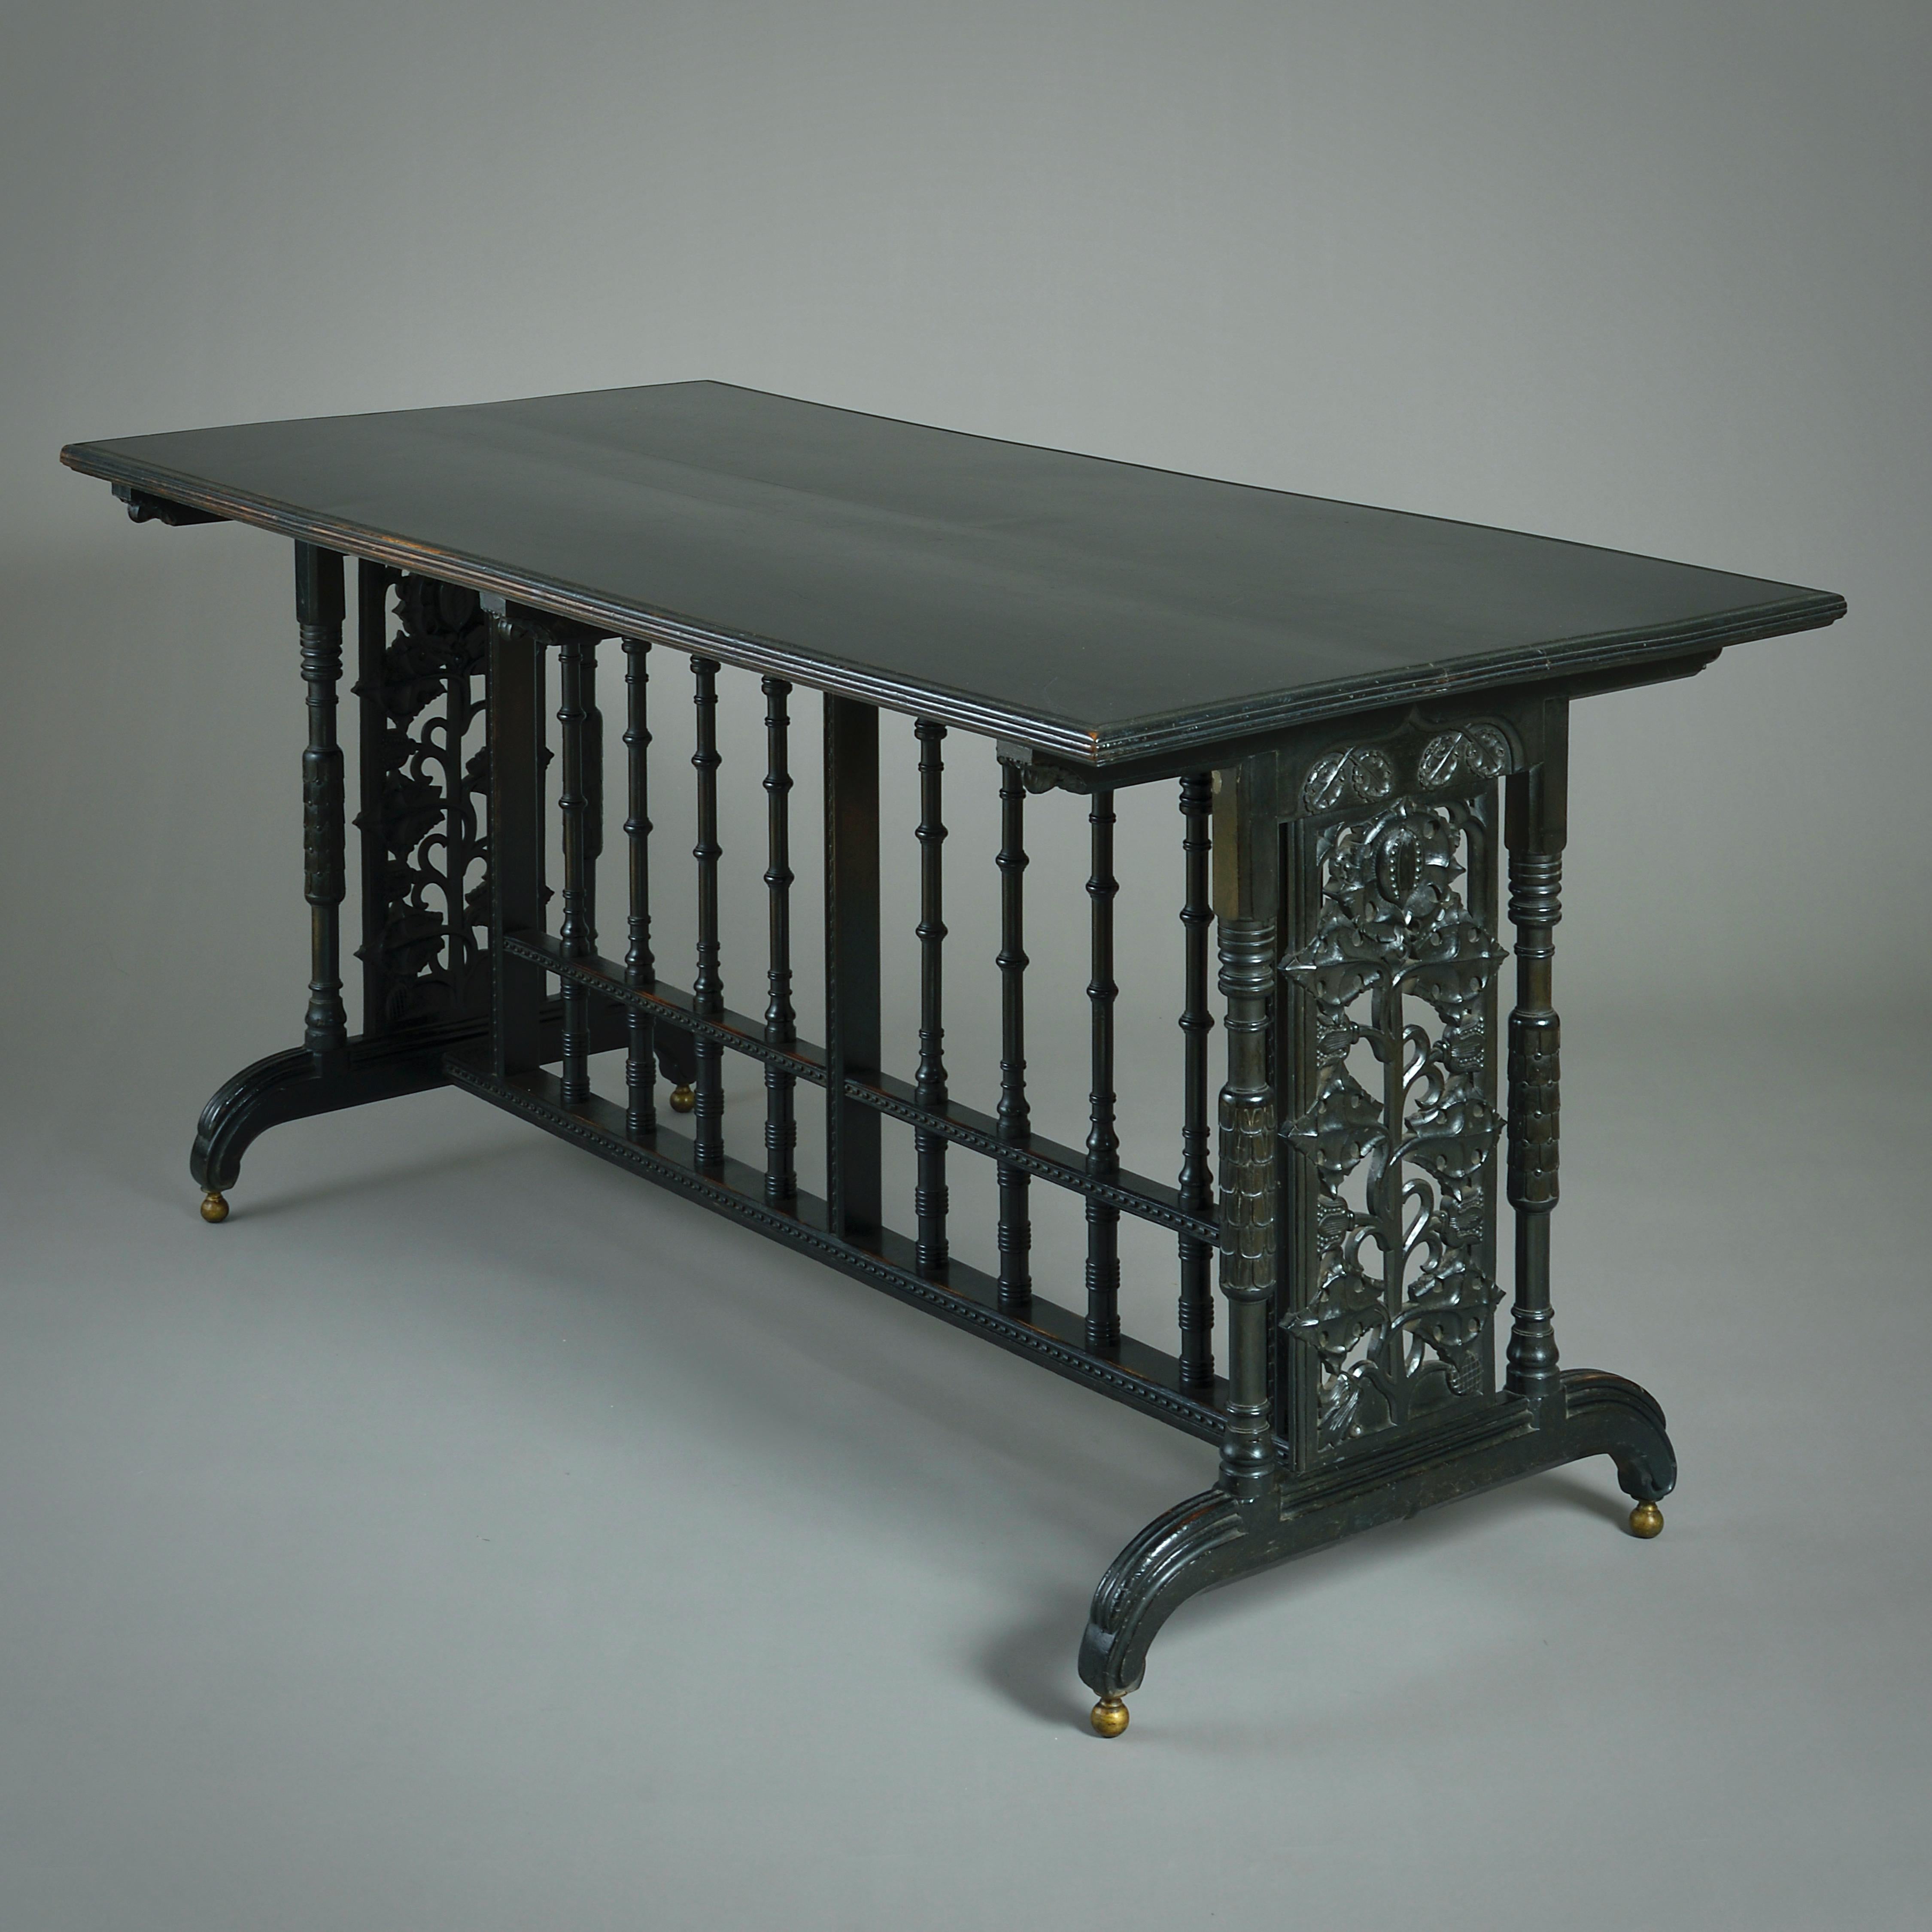 A VERY FINE EBONISED LIBRARY / WRITING-TABLE DESIGNED BY JOHN FRANCIS BENTLEY, CIRCA 1870.
Designed by the architect John Francis Bentley (1839-1902) for Sunnydene, Rockhills, Sydenham.

PROVENANCE: supplied to W. R. Sutton, Sunnydene, Sydenham, c.